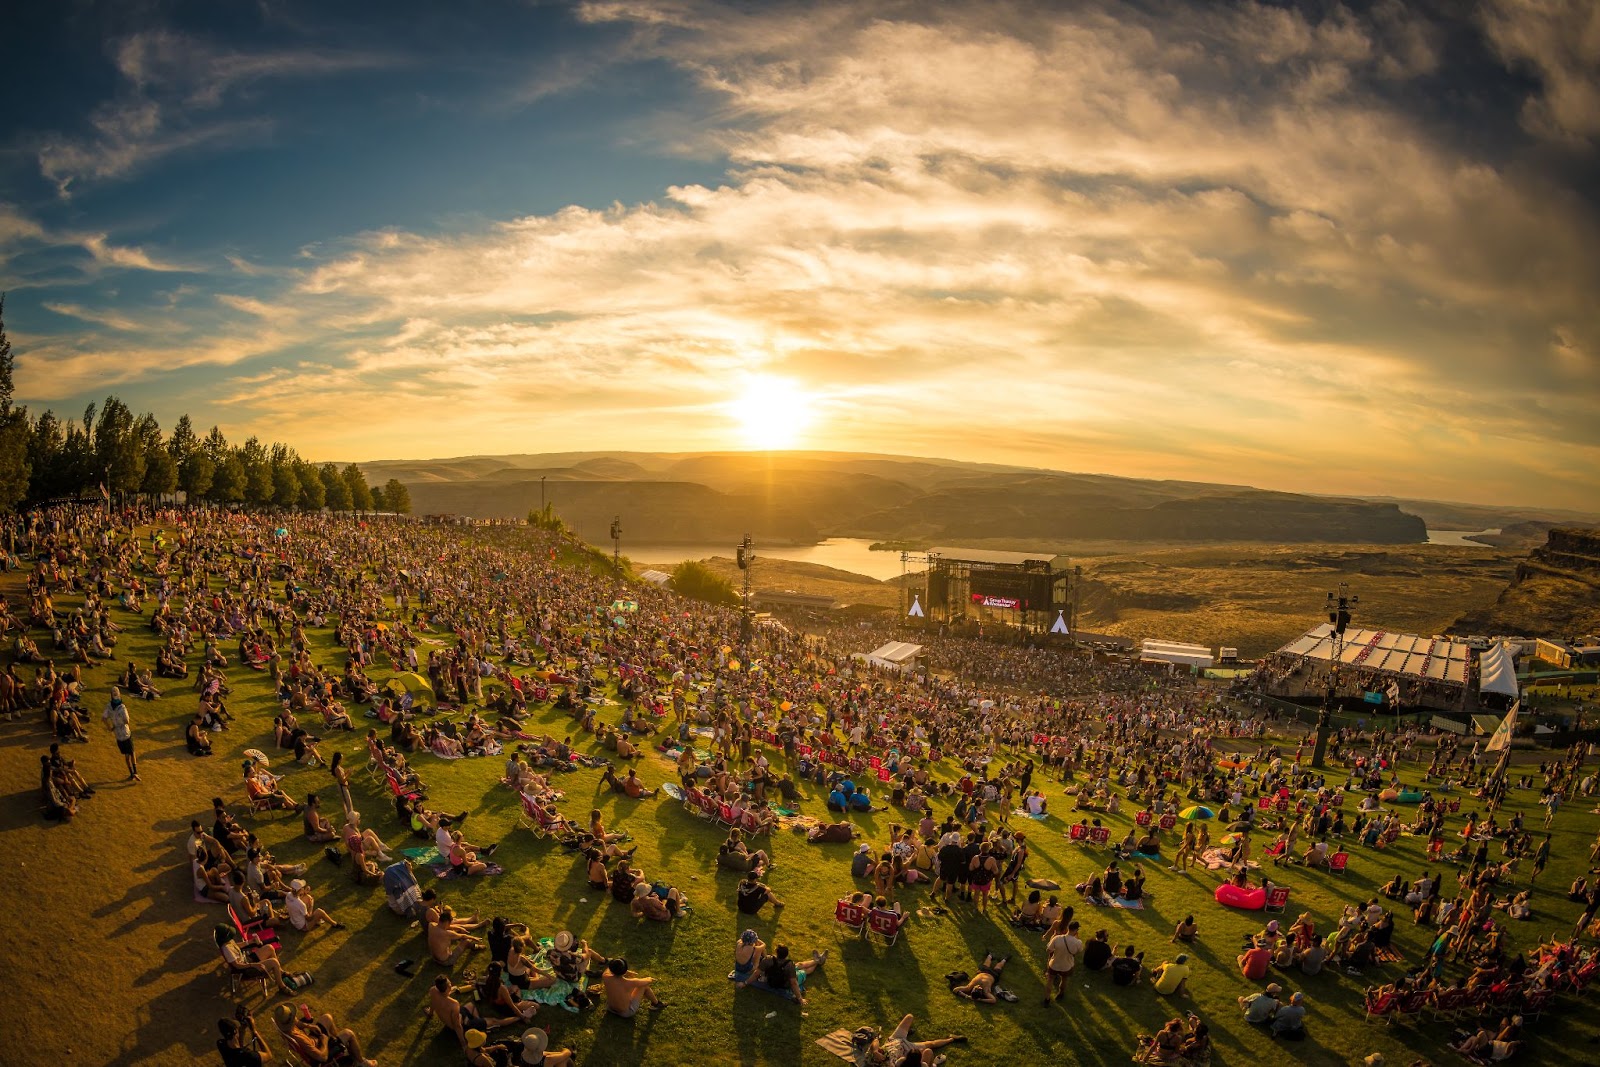 Above and Beyond presents Group Therapy Weekender at The Gorge Amphitheatre, WA, USA